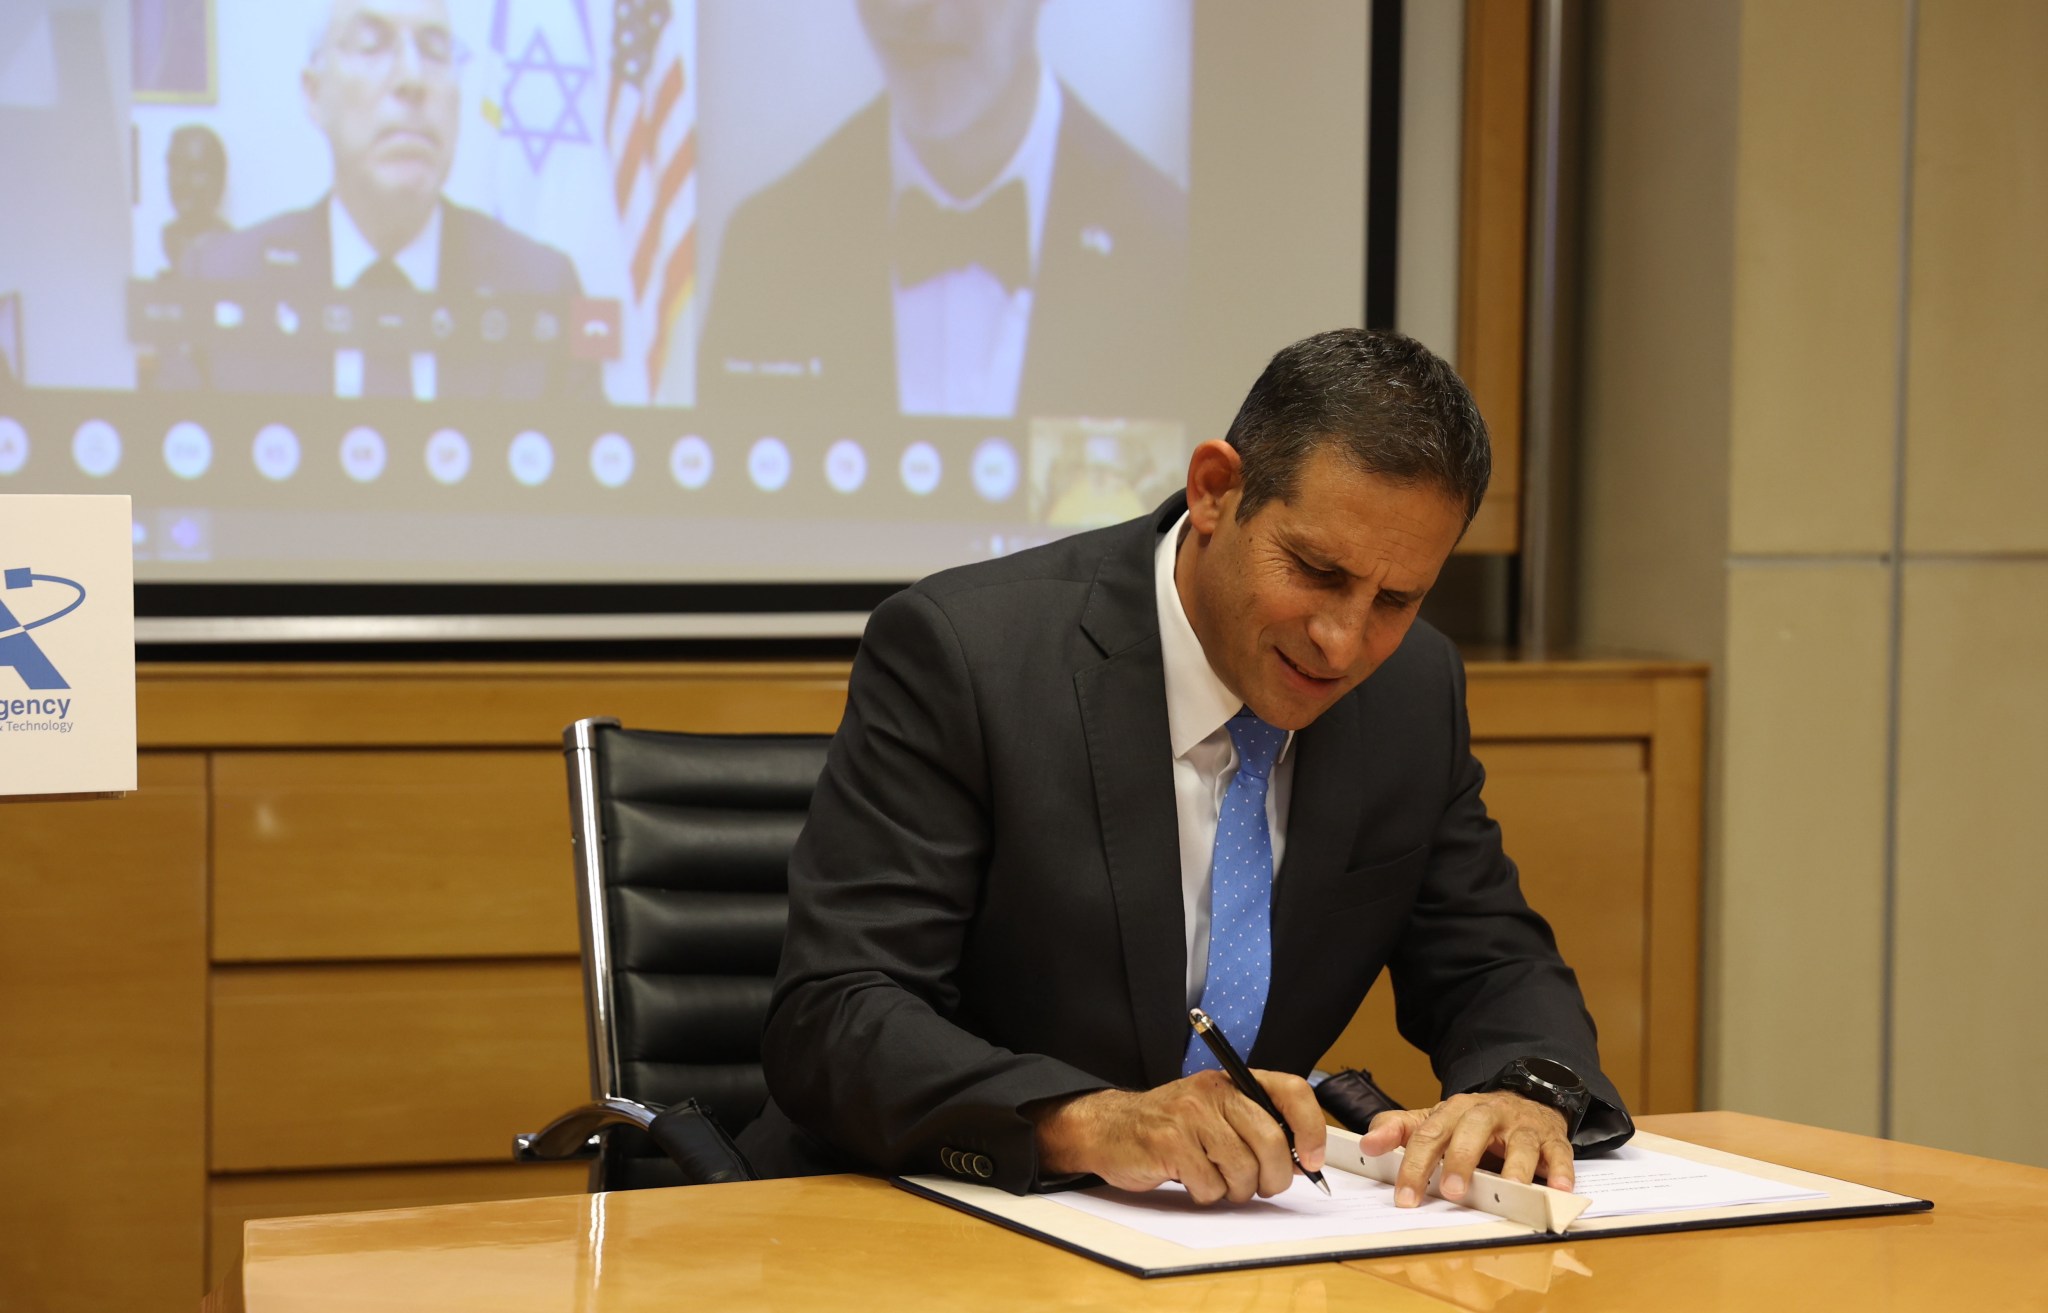 Israel Space Agency Director General Uri Oron signs the Artemis Accords during a ceremony in Tel Aviv Jan. 26, 2022.